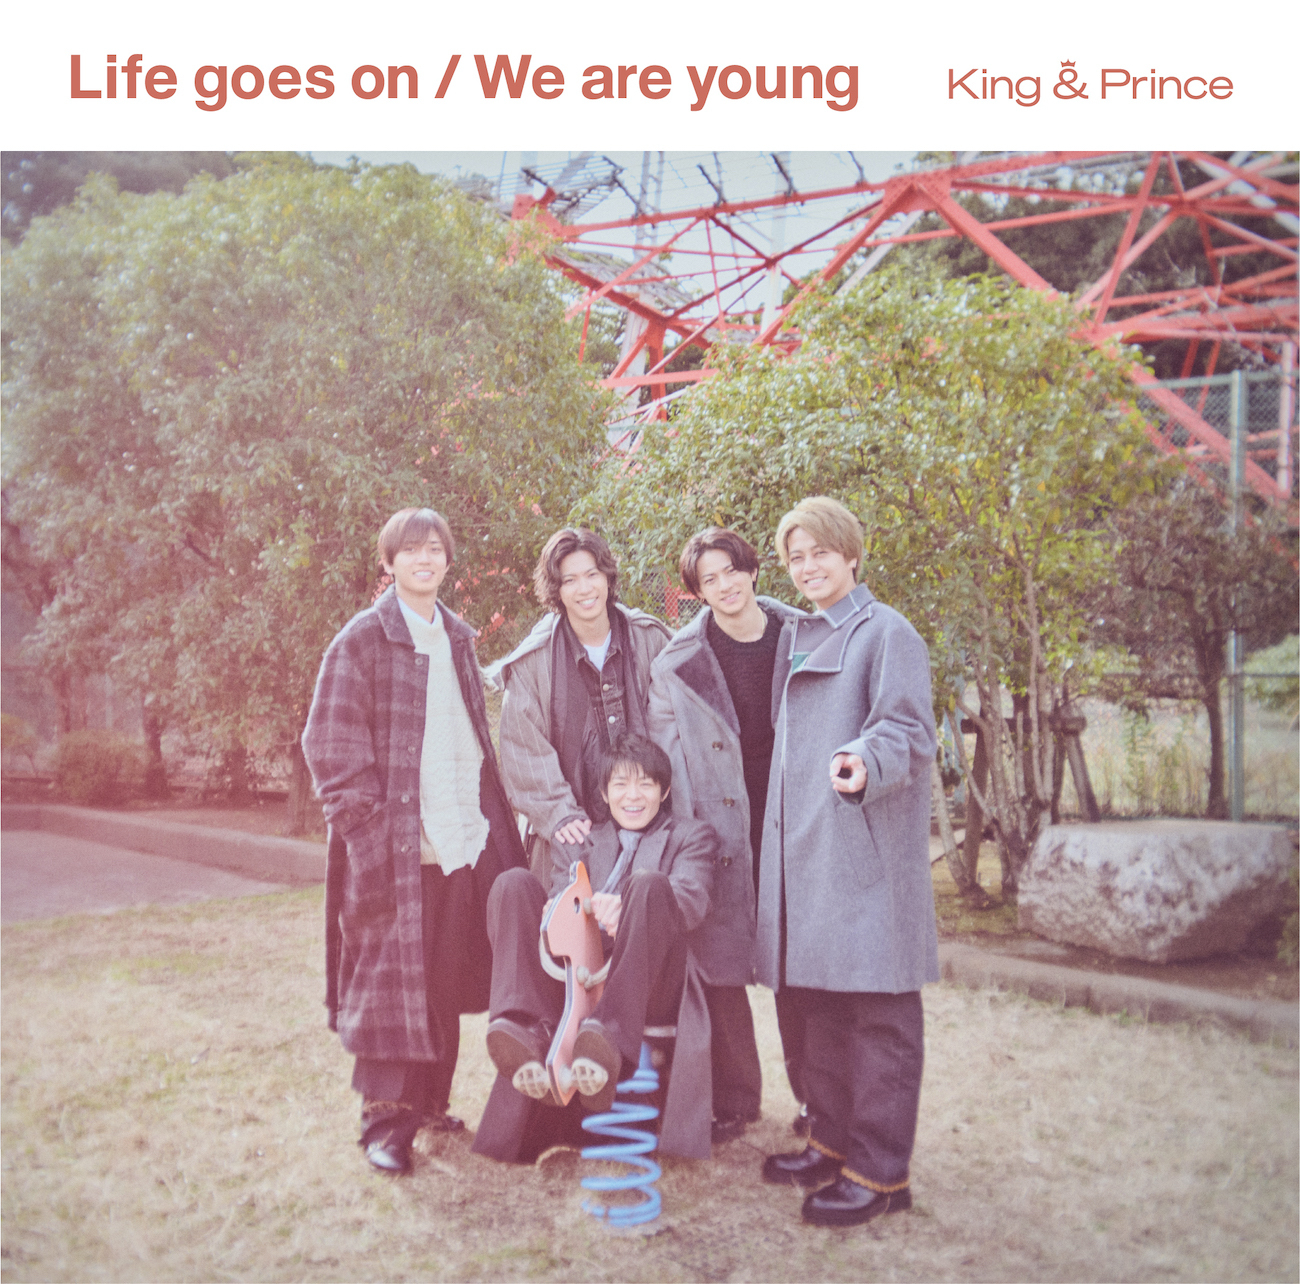 「Life goes on / We are young」Dear Tiara盤（ファンクラブ限定盤）